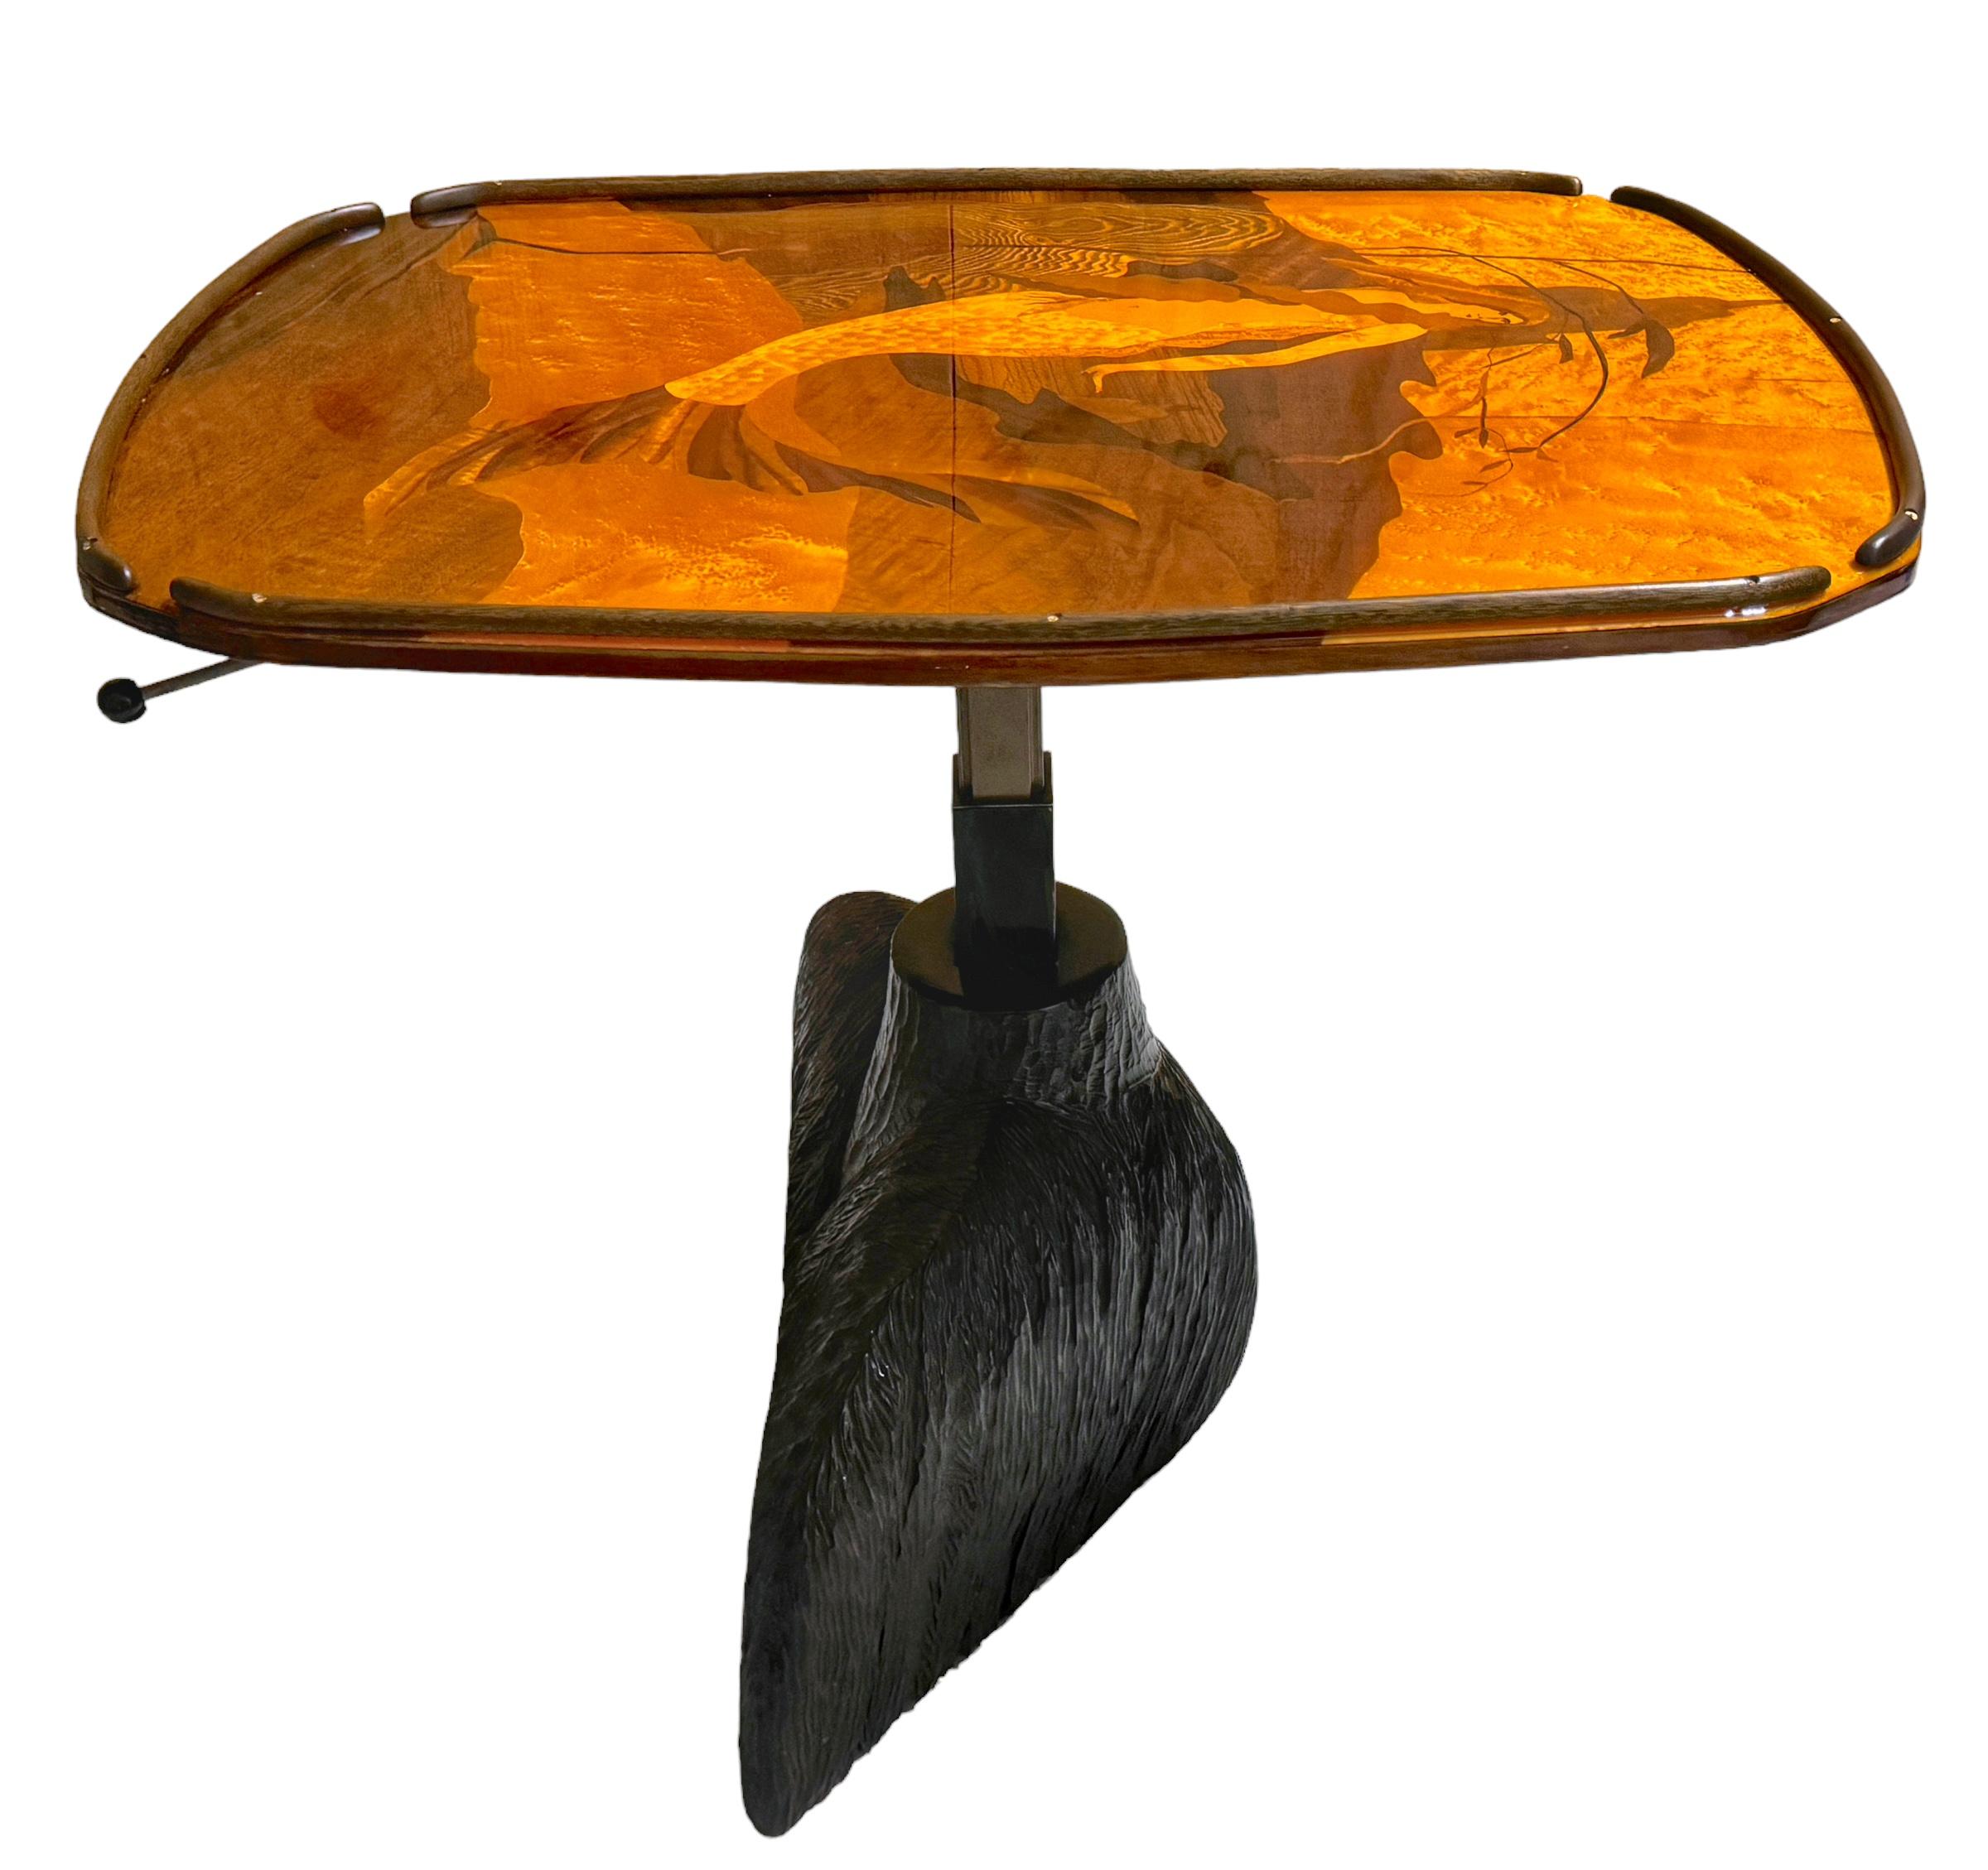 20th Century Fantasy Inlaid Mermaid Adjustable Coffee/ High Top Yacht Table, Style of Galle For Sale